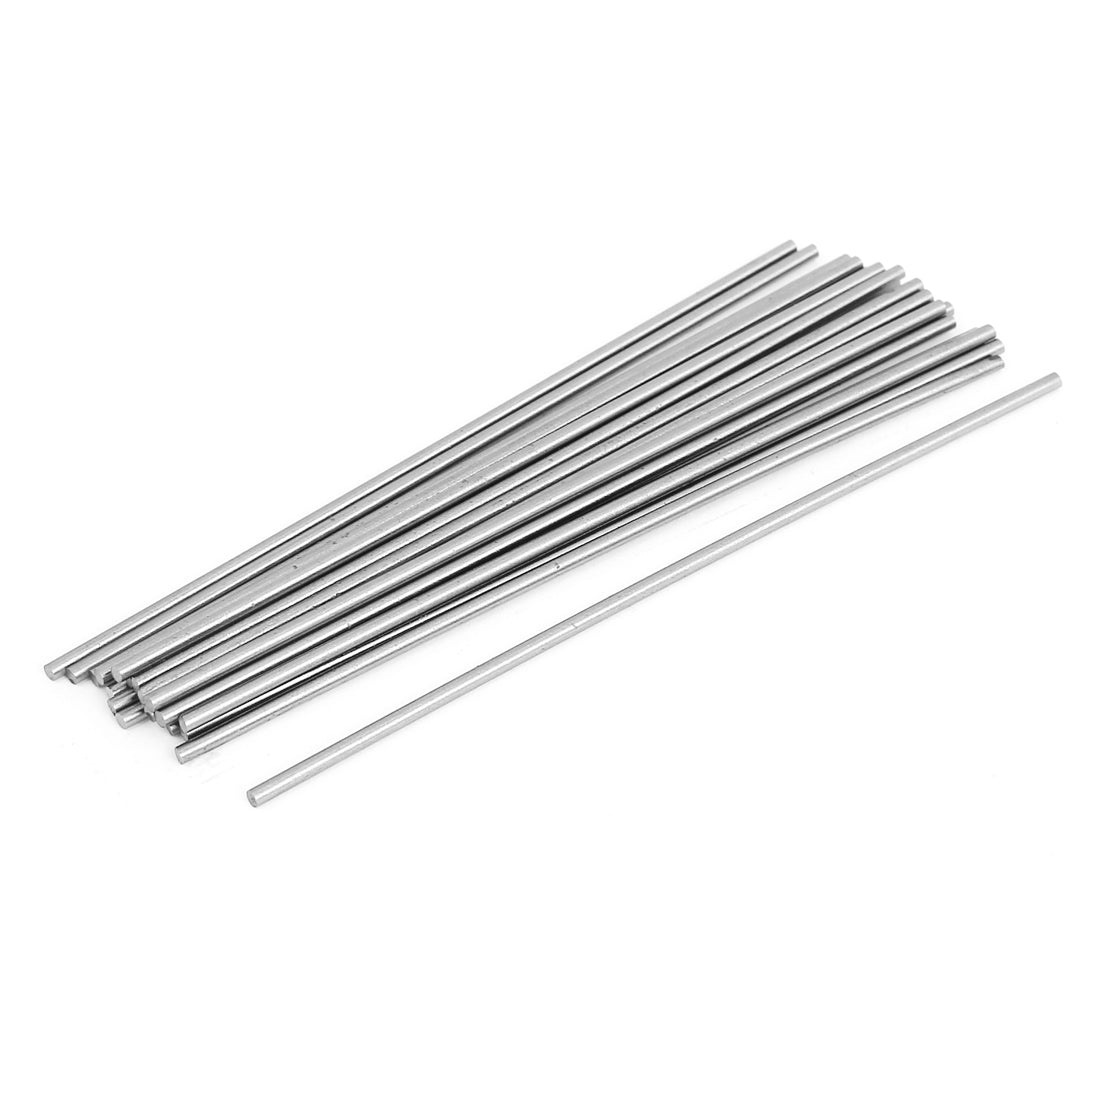 Uxcell Uxcell 20pcs HSS High Speed Steel Turning Carbide Bars for CNC Lathe 3mmx150mm